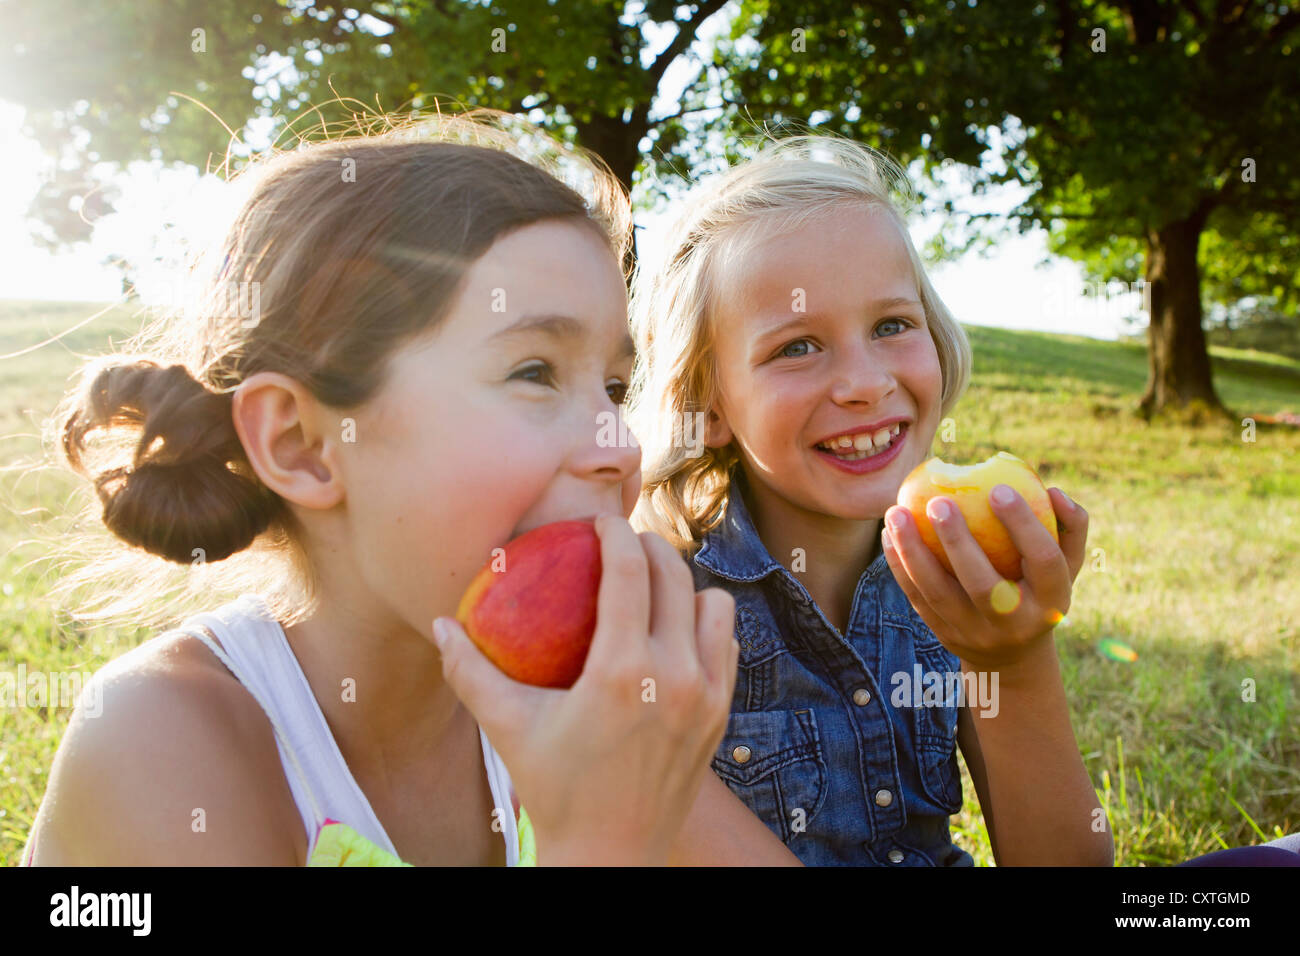 Laughing girls eating apples outdoors Stock Photo